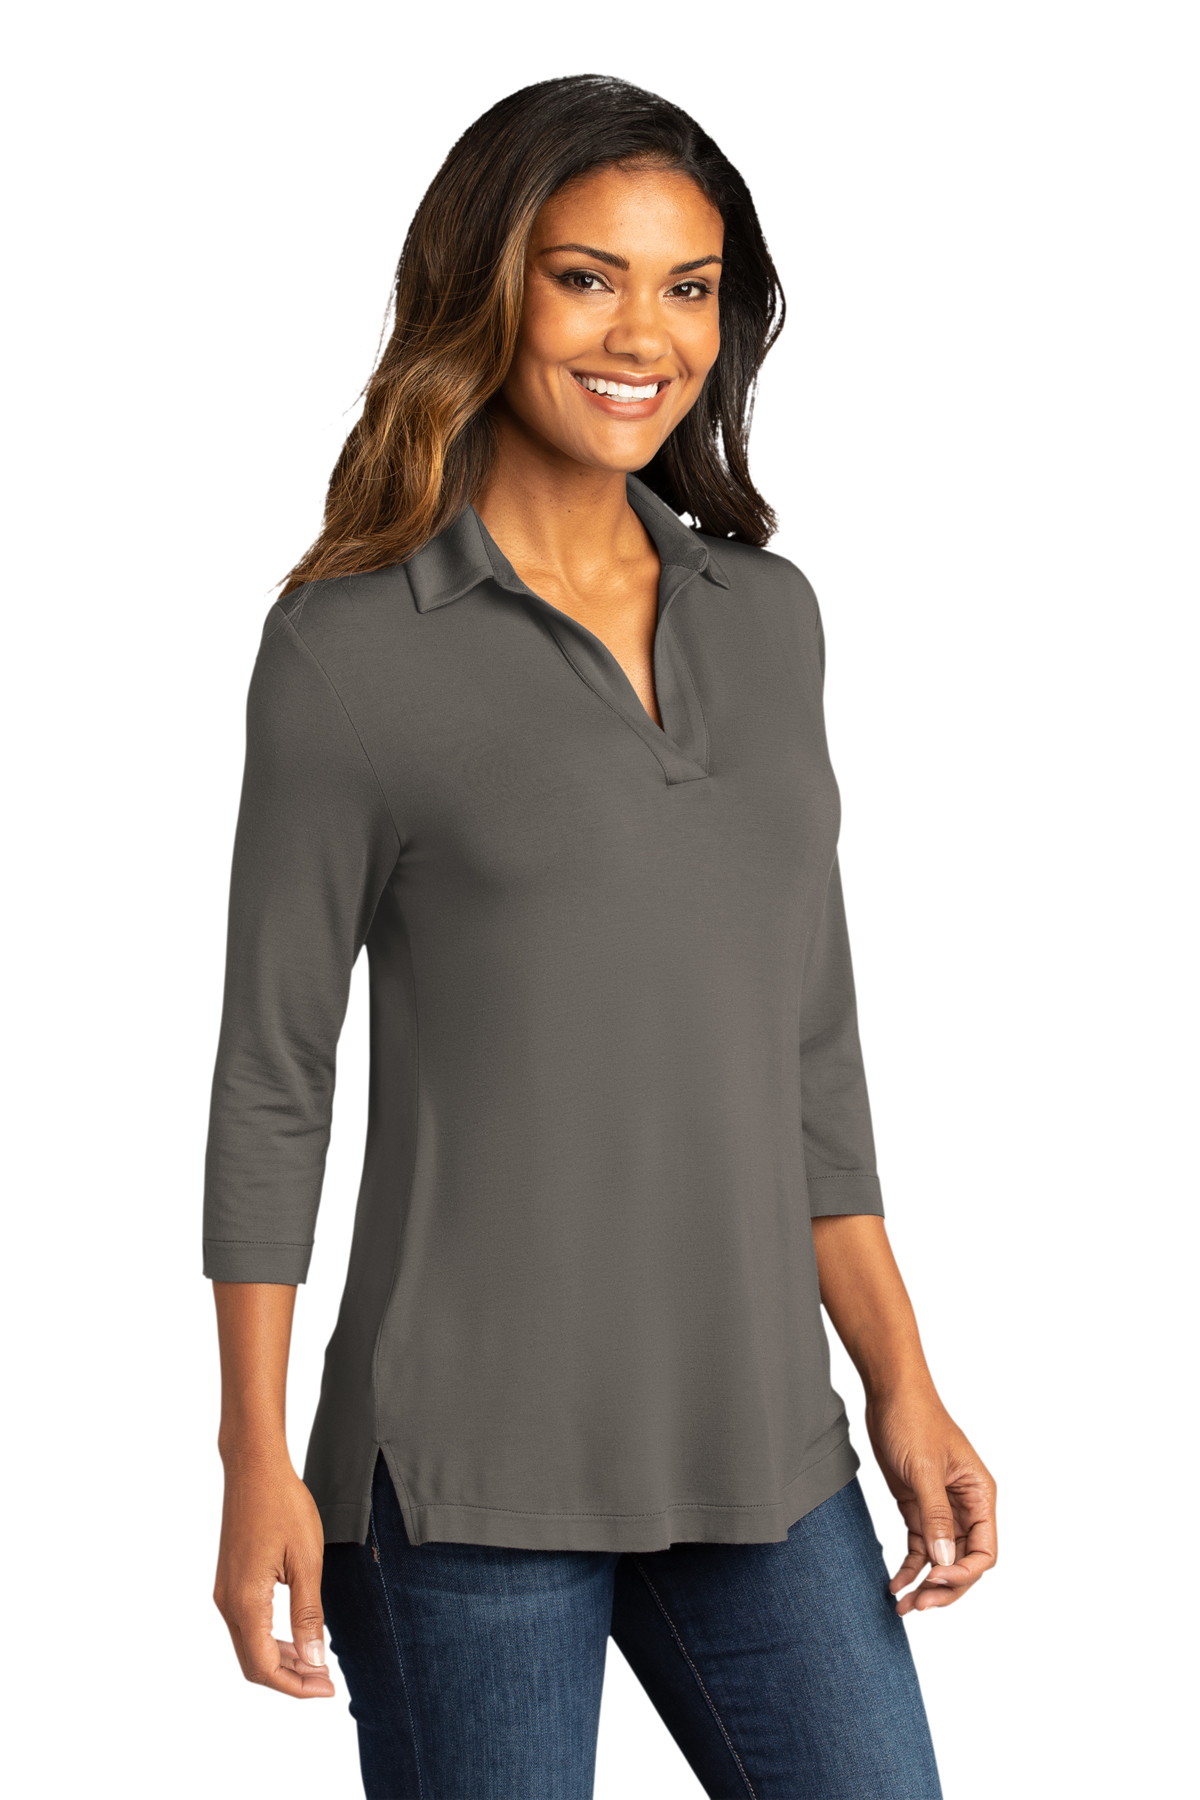 Authority Tunic Product Ladies Knit | Luxe Port Port | Authority